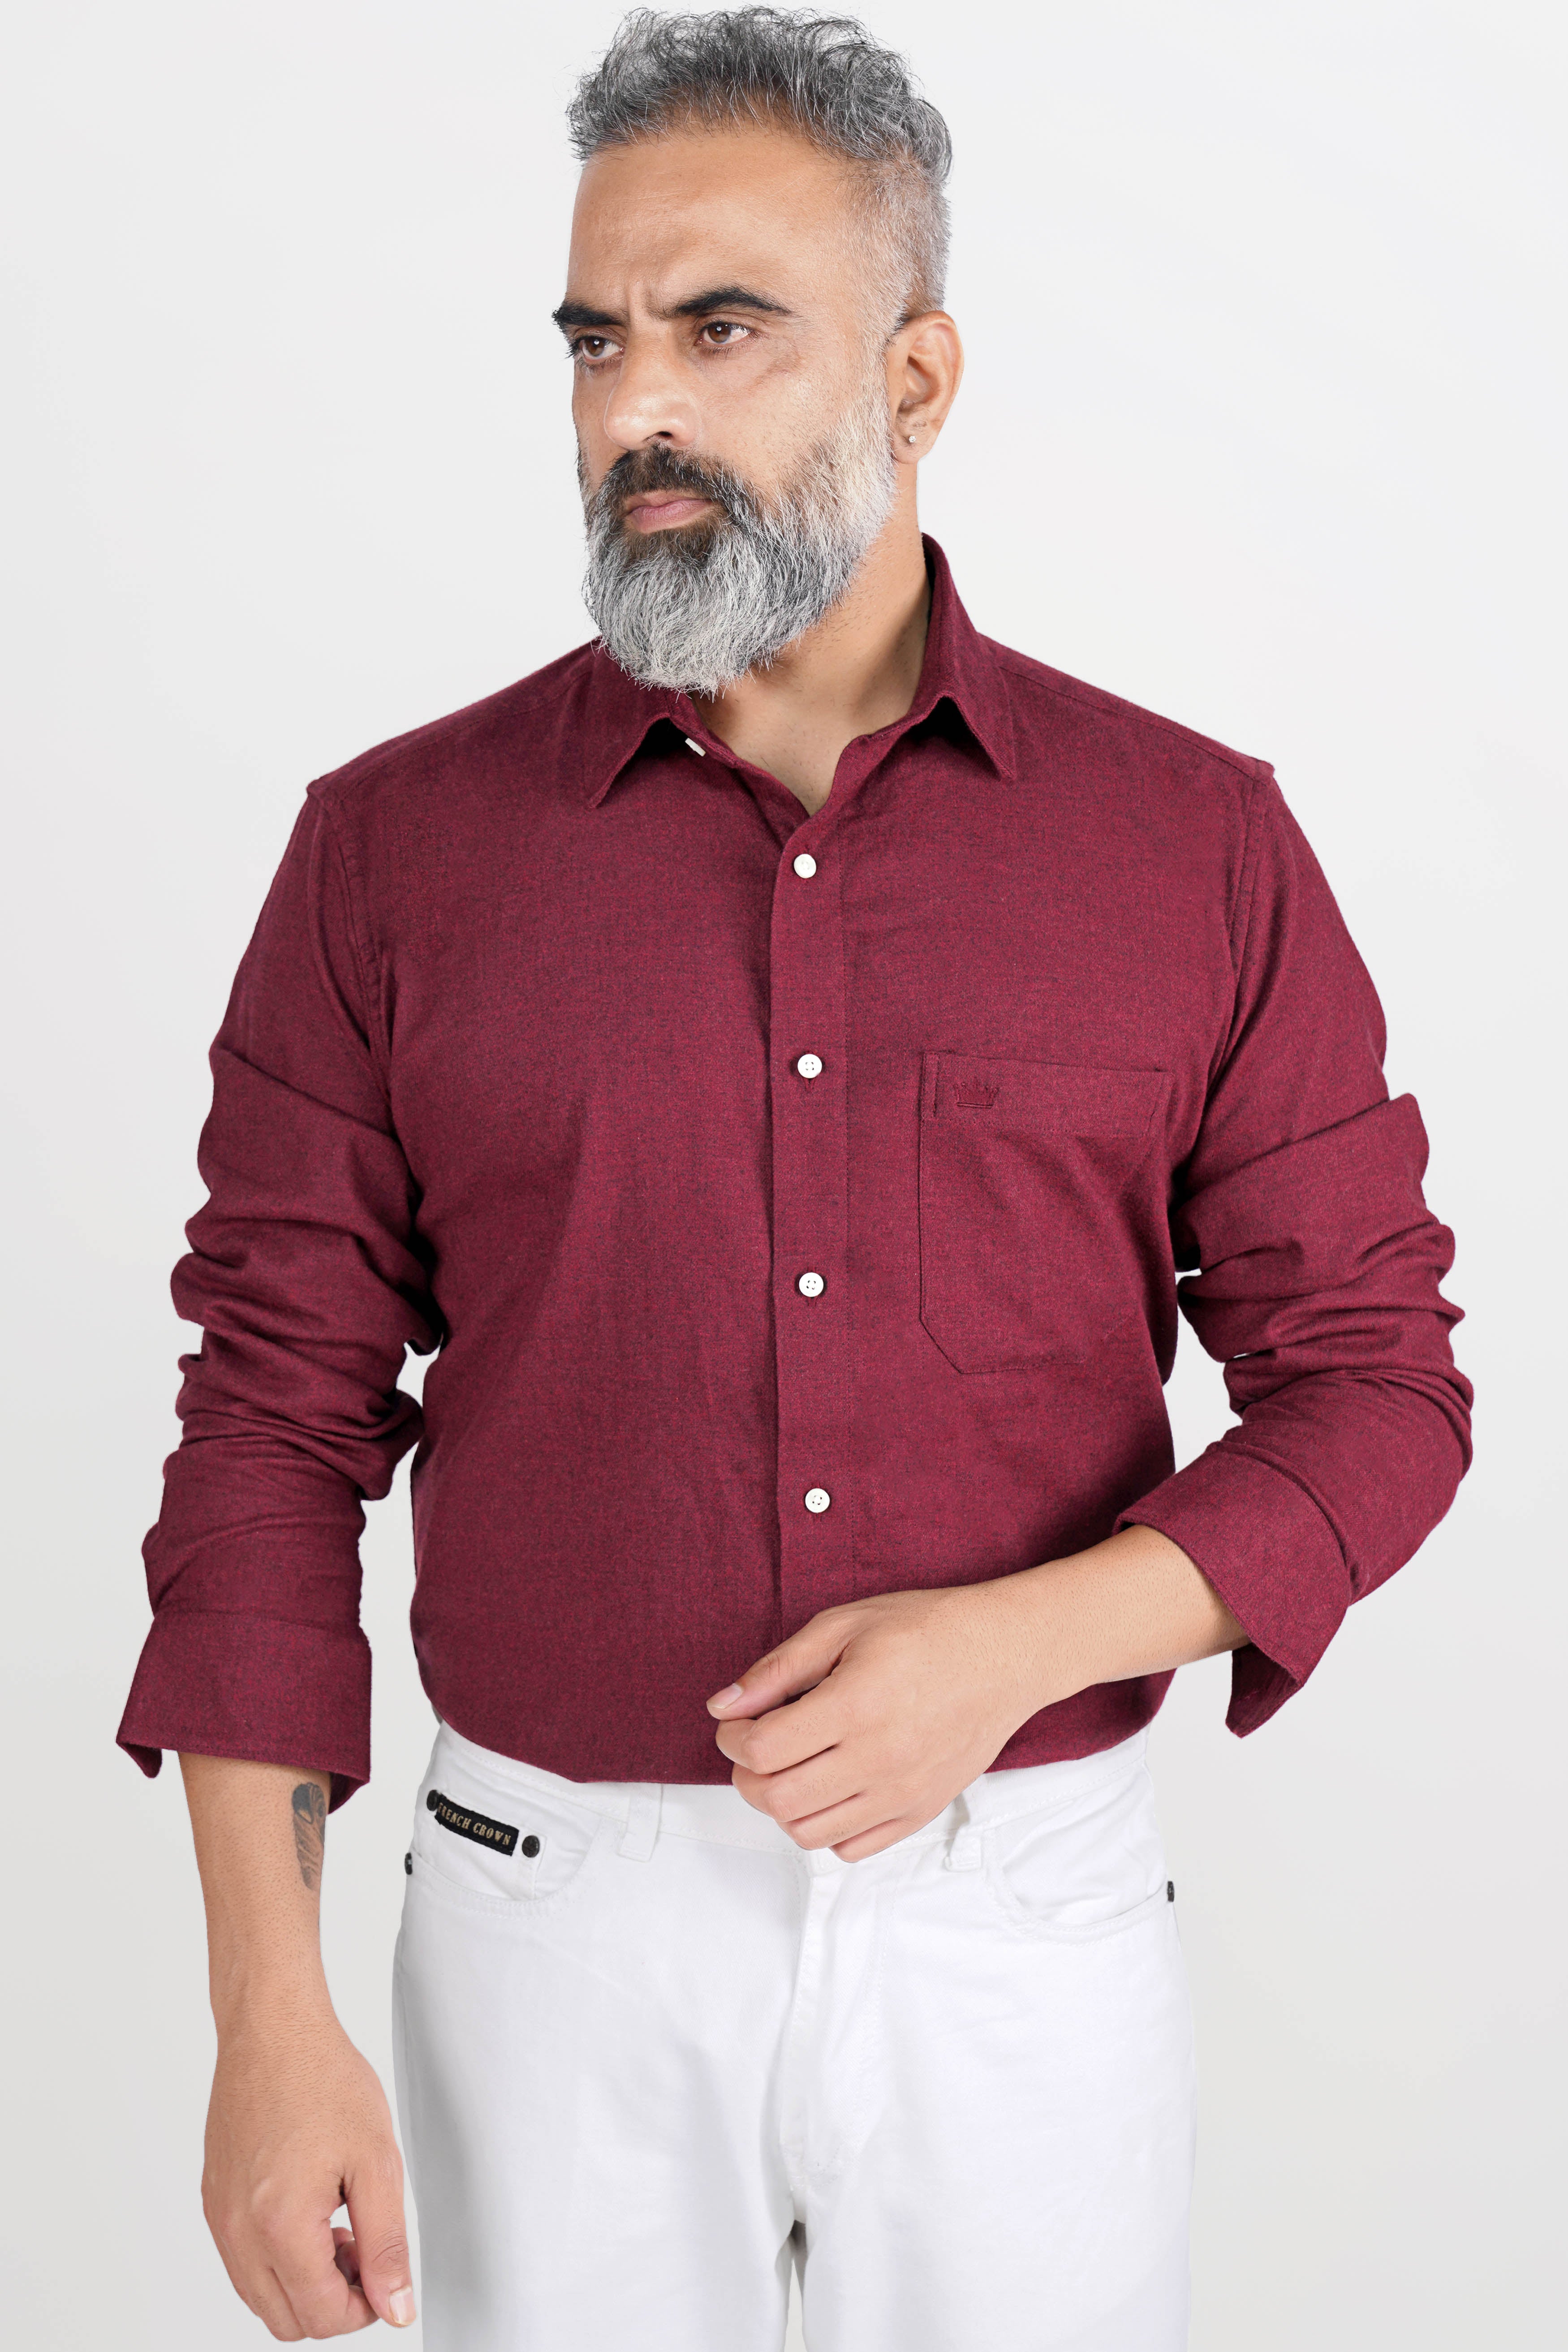 Best Color Pants for Maroon Shirts